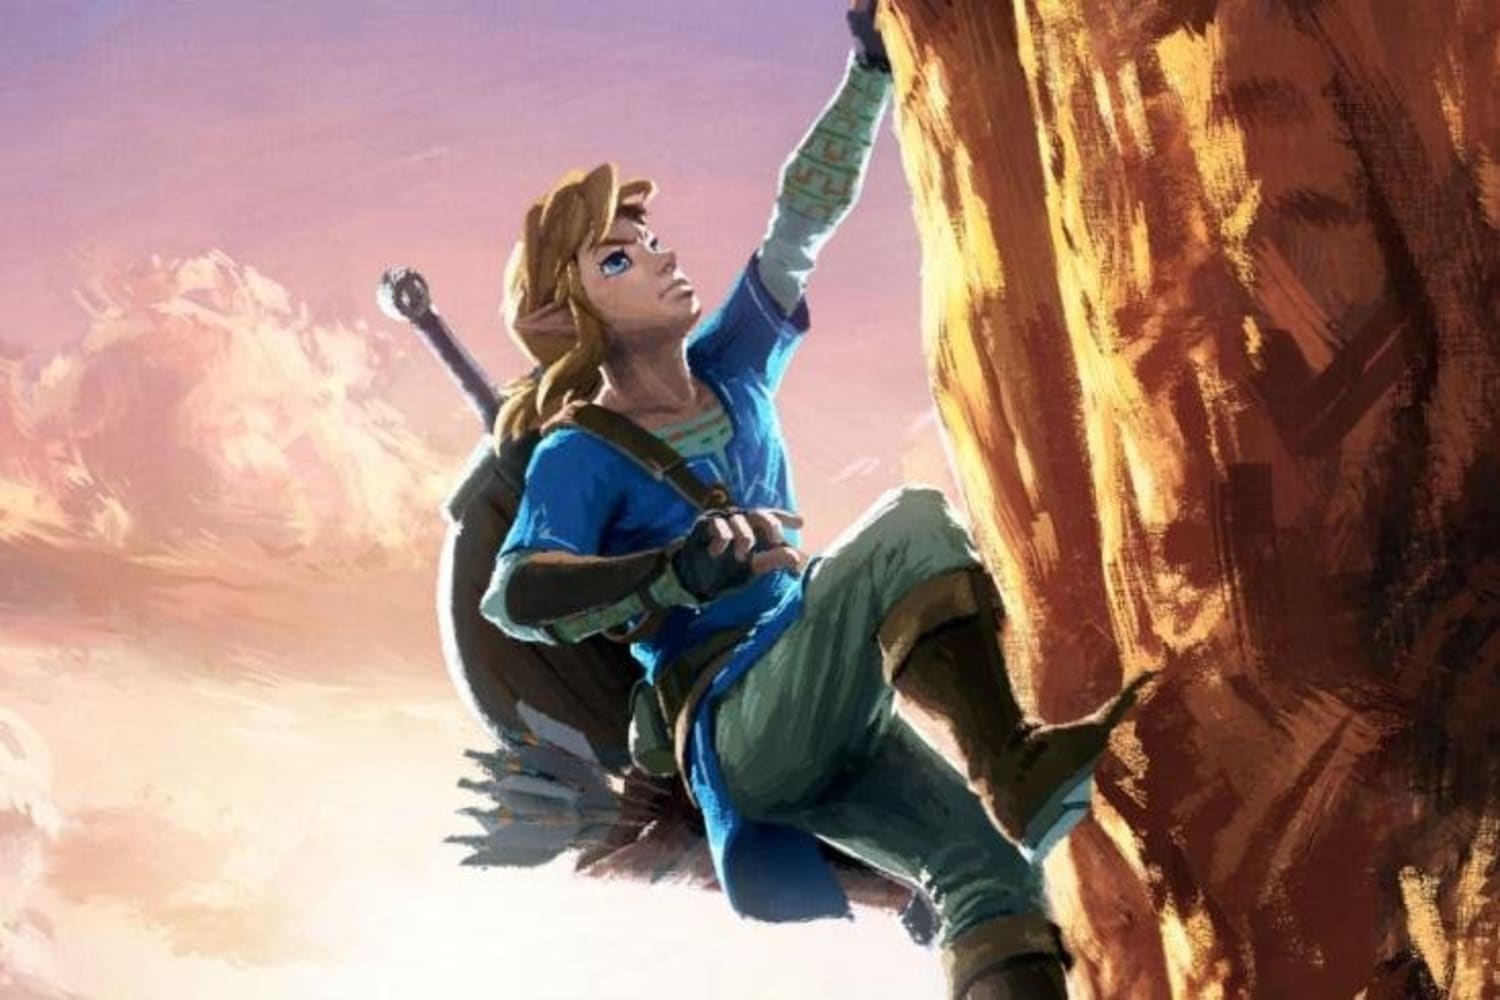 Zelda: Breath of the Wild - 5 things it needs to fix